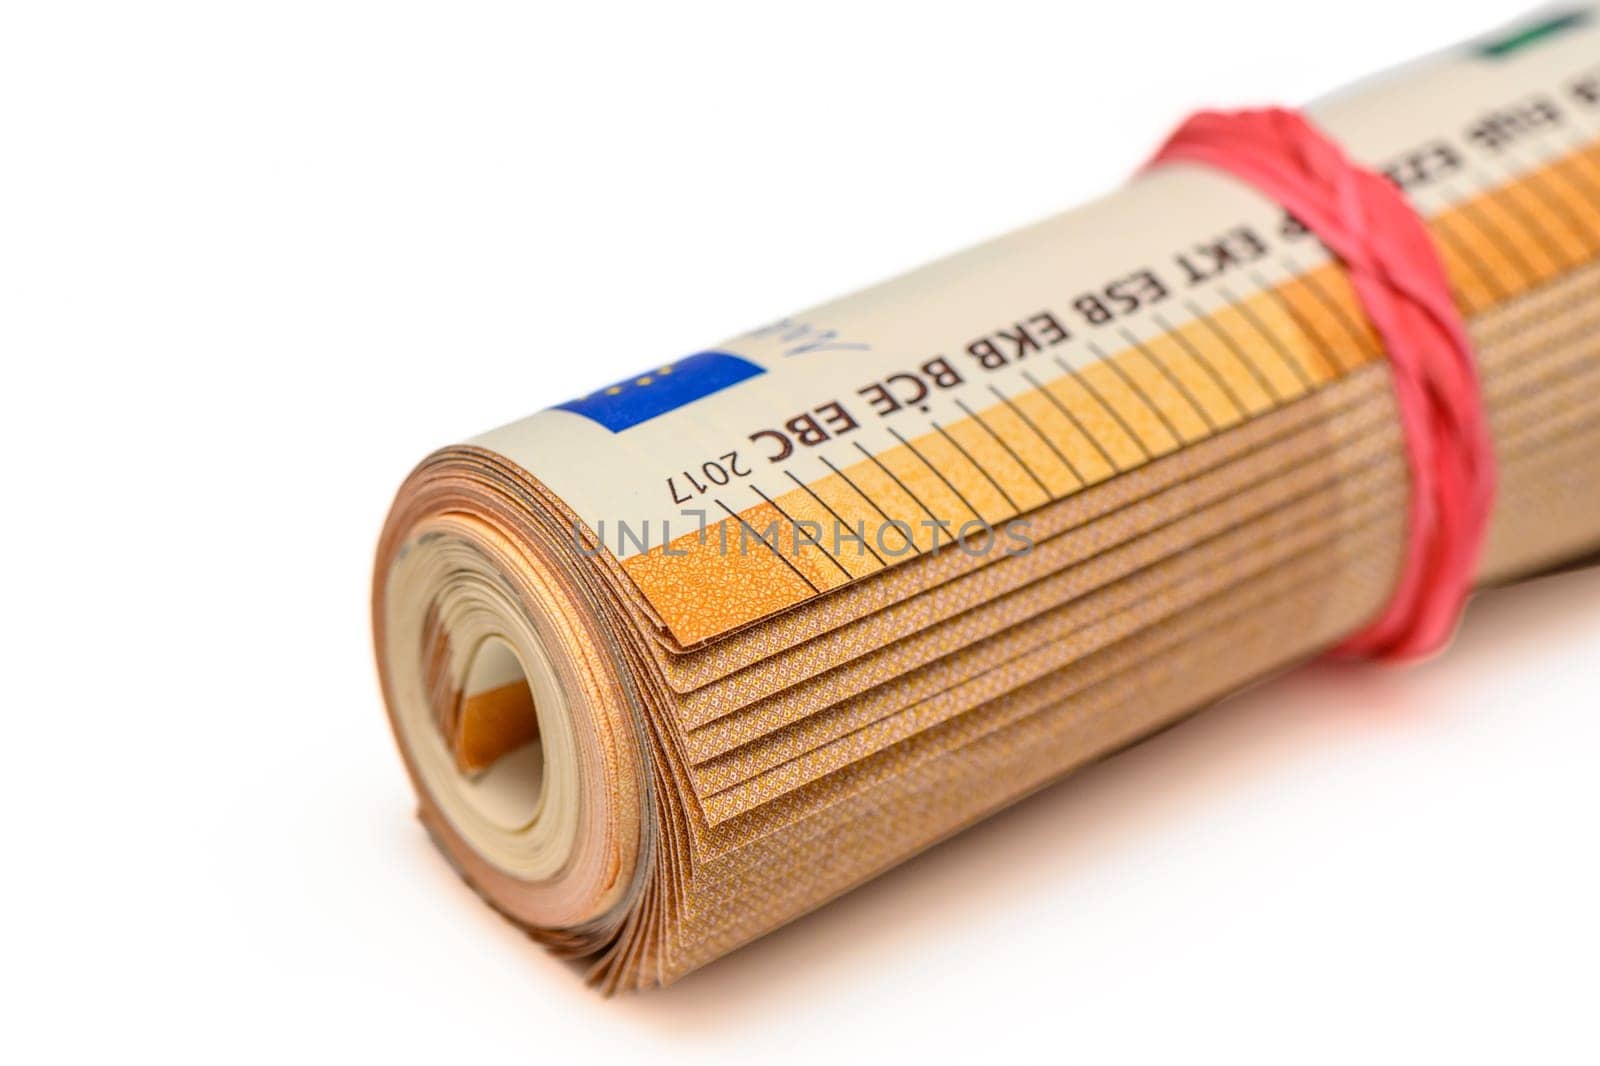 50 euro bills on white background rolled into a tube 3 by Mixa74